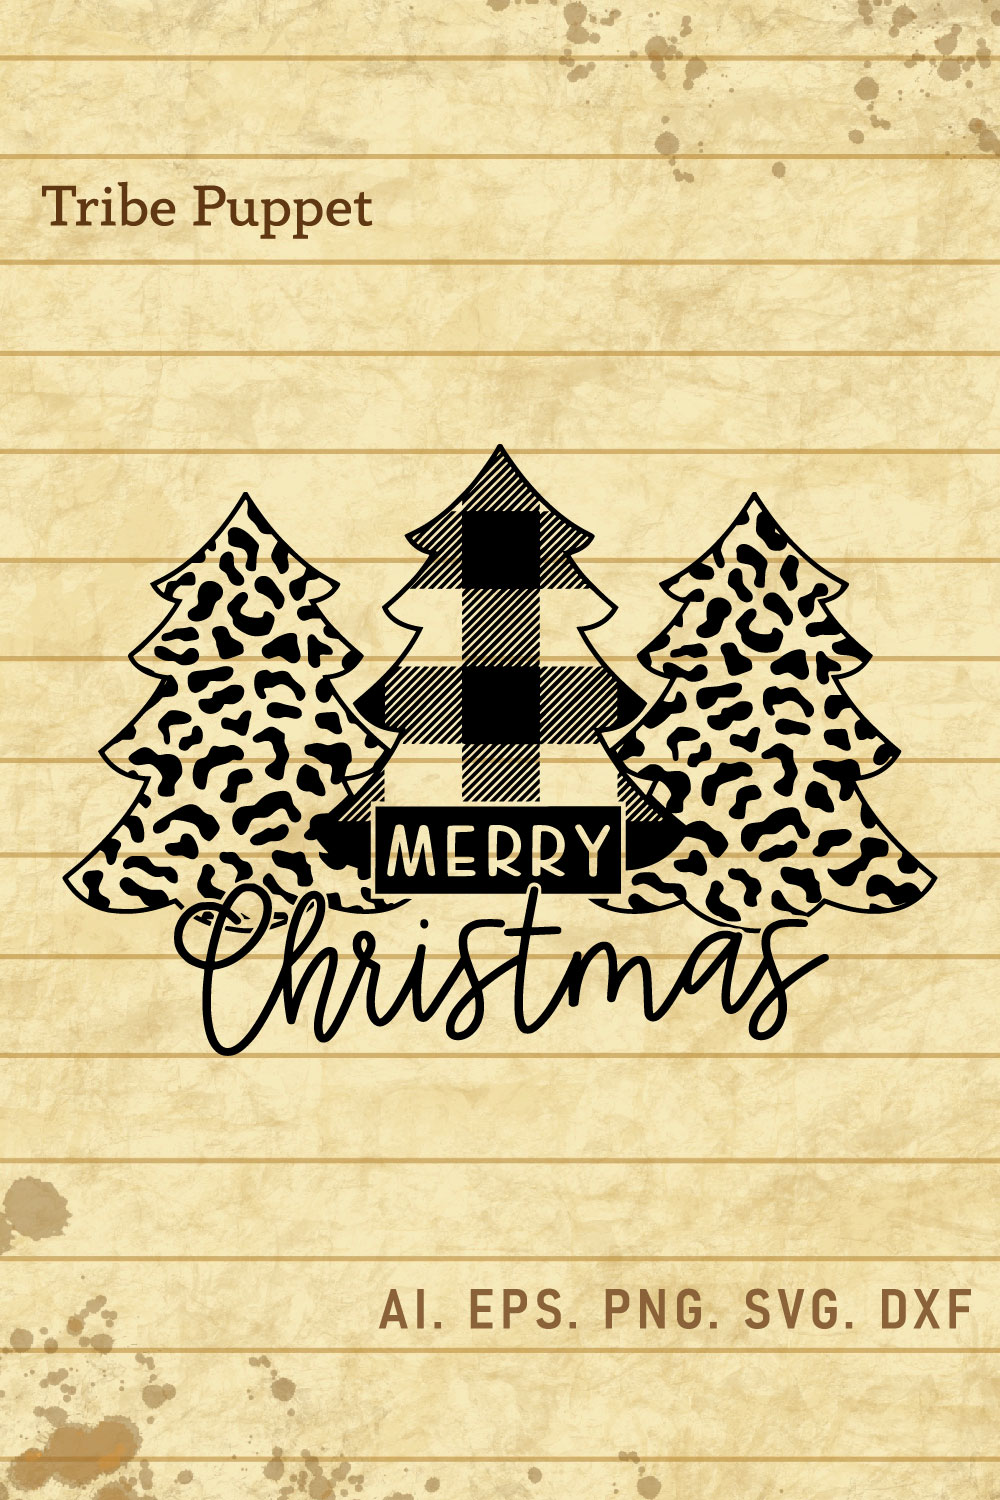 Merry Christmas pinterest preview image.